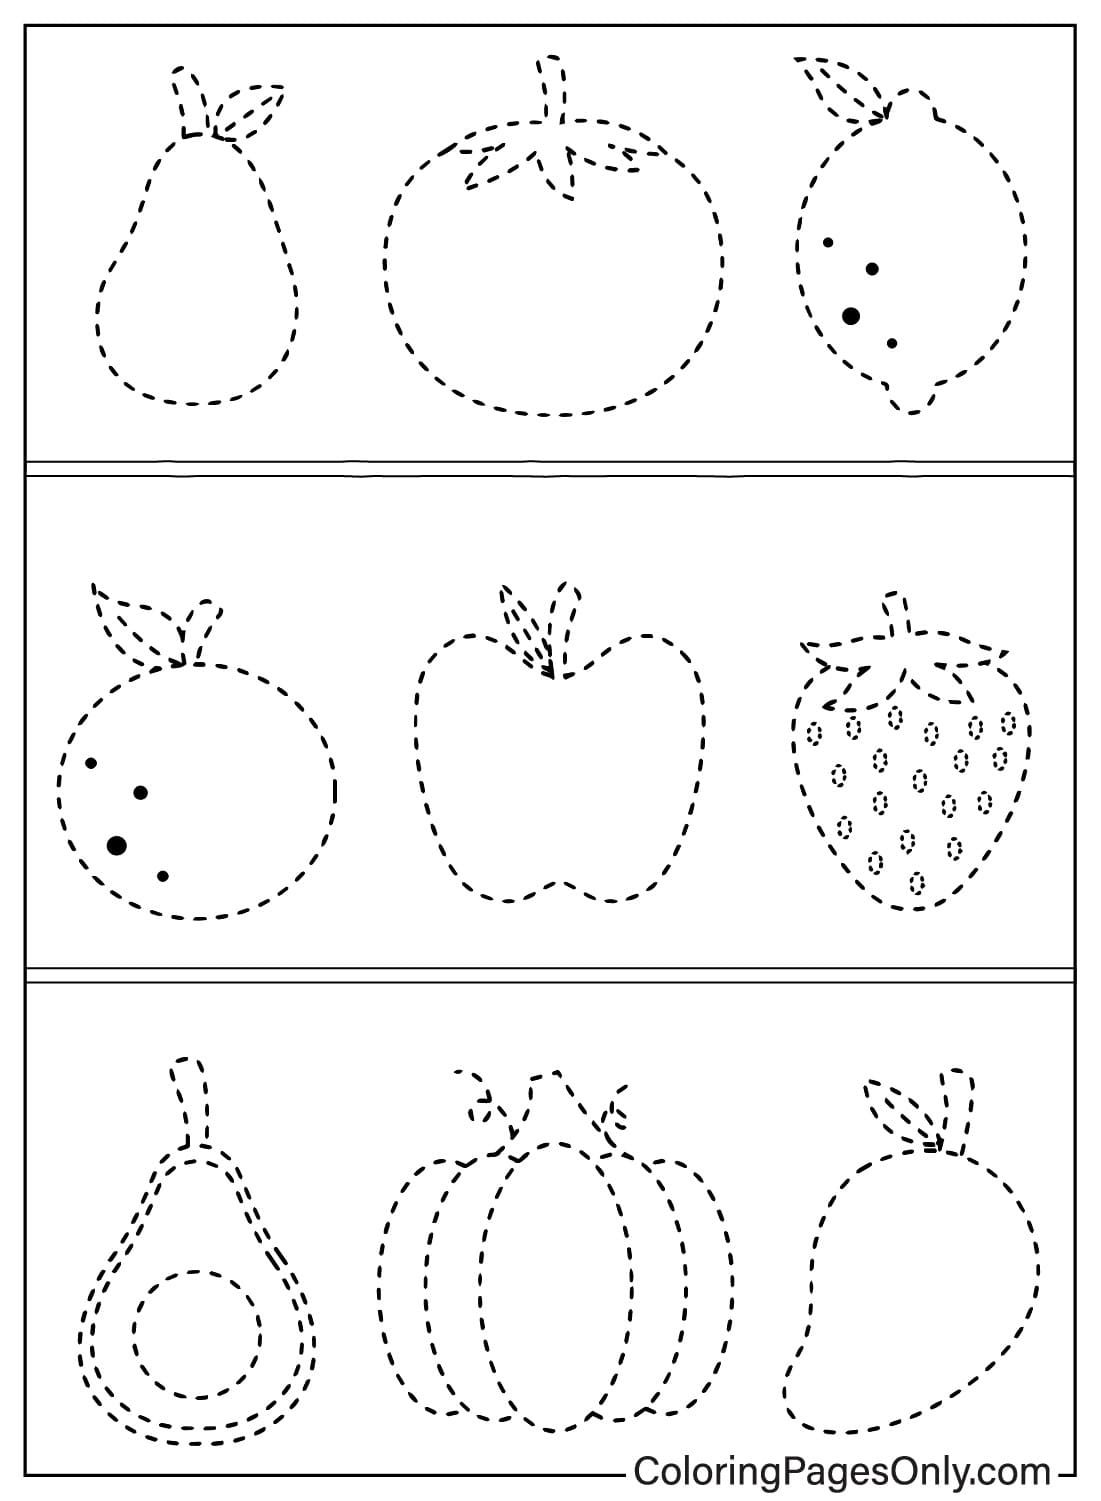 Tracing Coloring Page Printable from Tracing